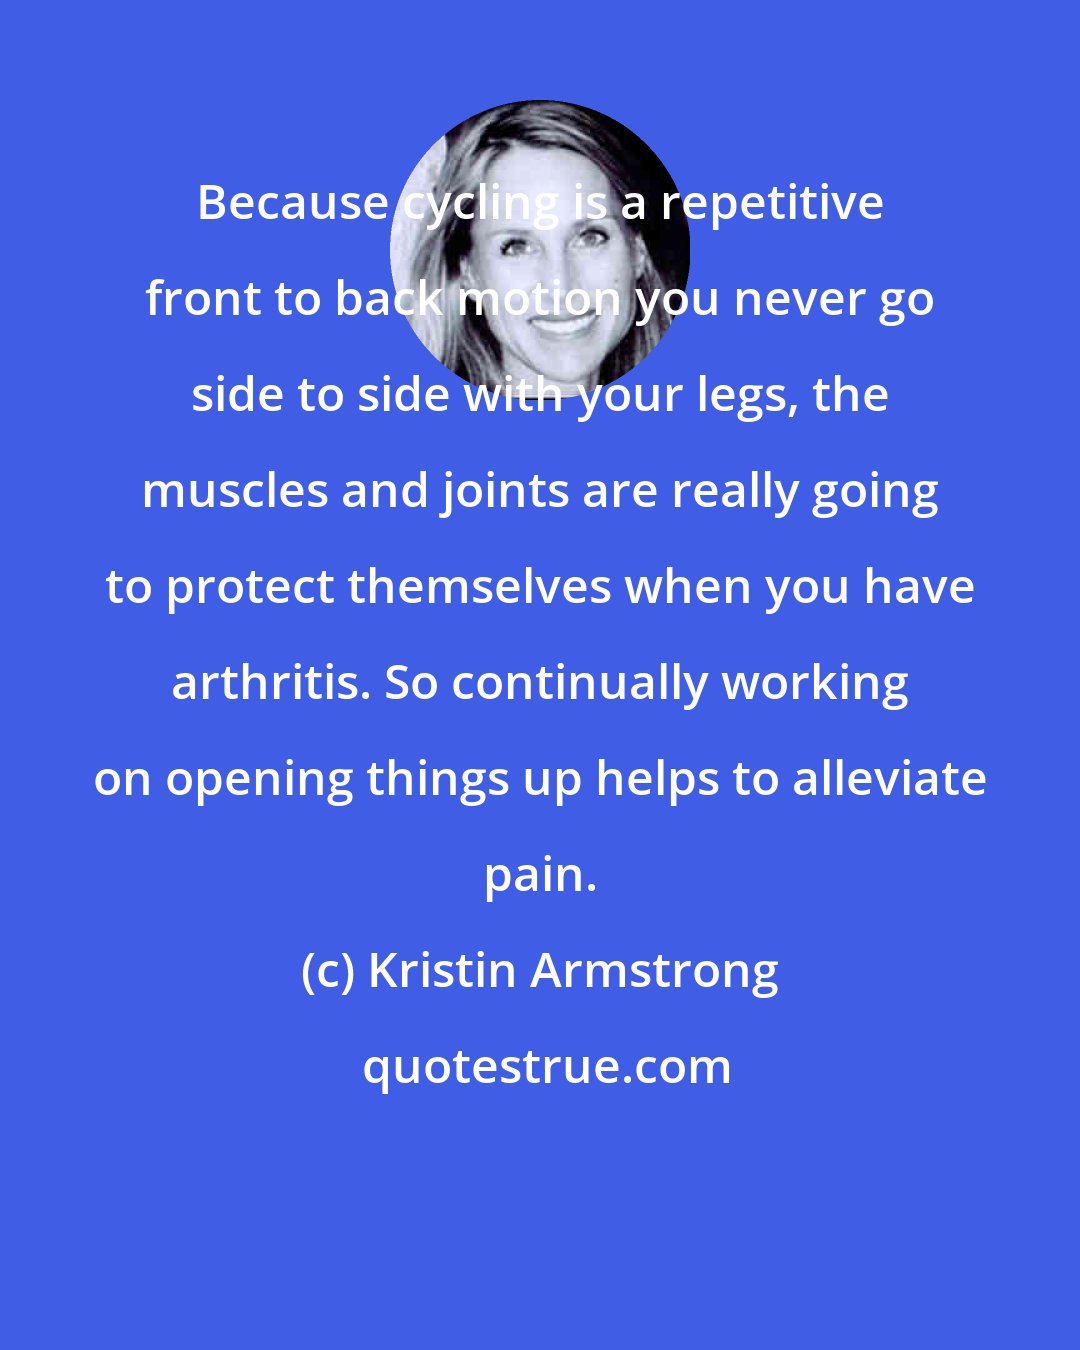 Kristin Armstrong: Because cycling is a repetitive front to back motion you never go side to side with your legs, the muscles and joints are really going to protect themselves when you have arthritis. So continually working on opening things up helps to alleviate pain.